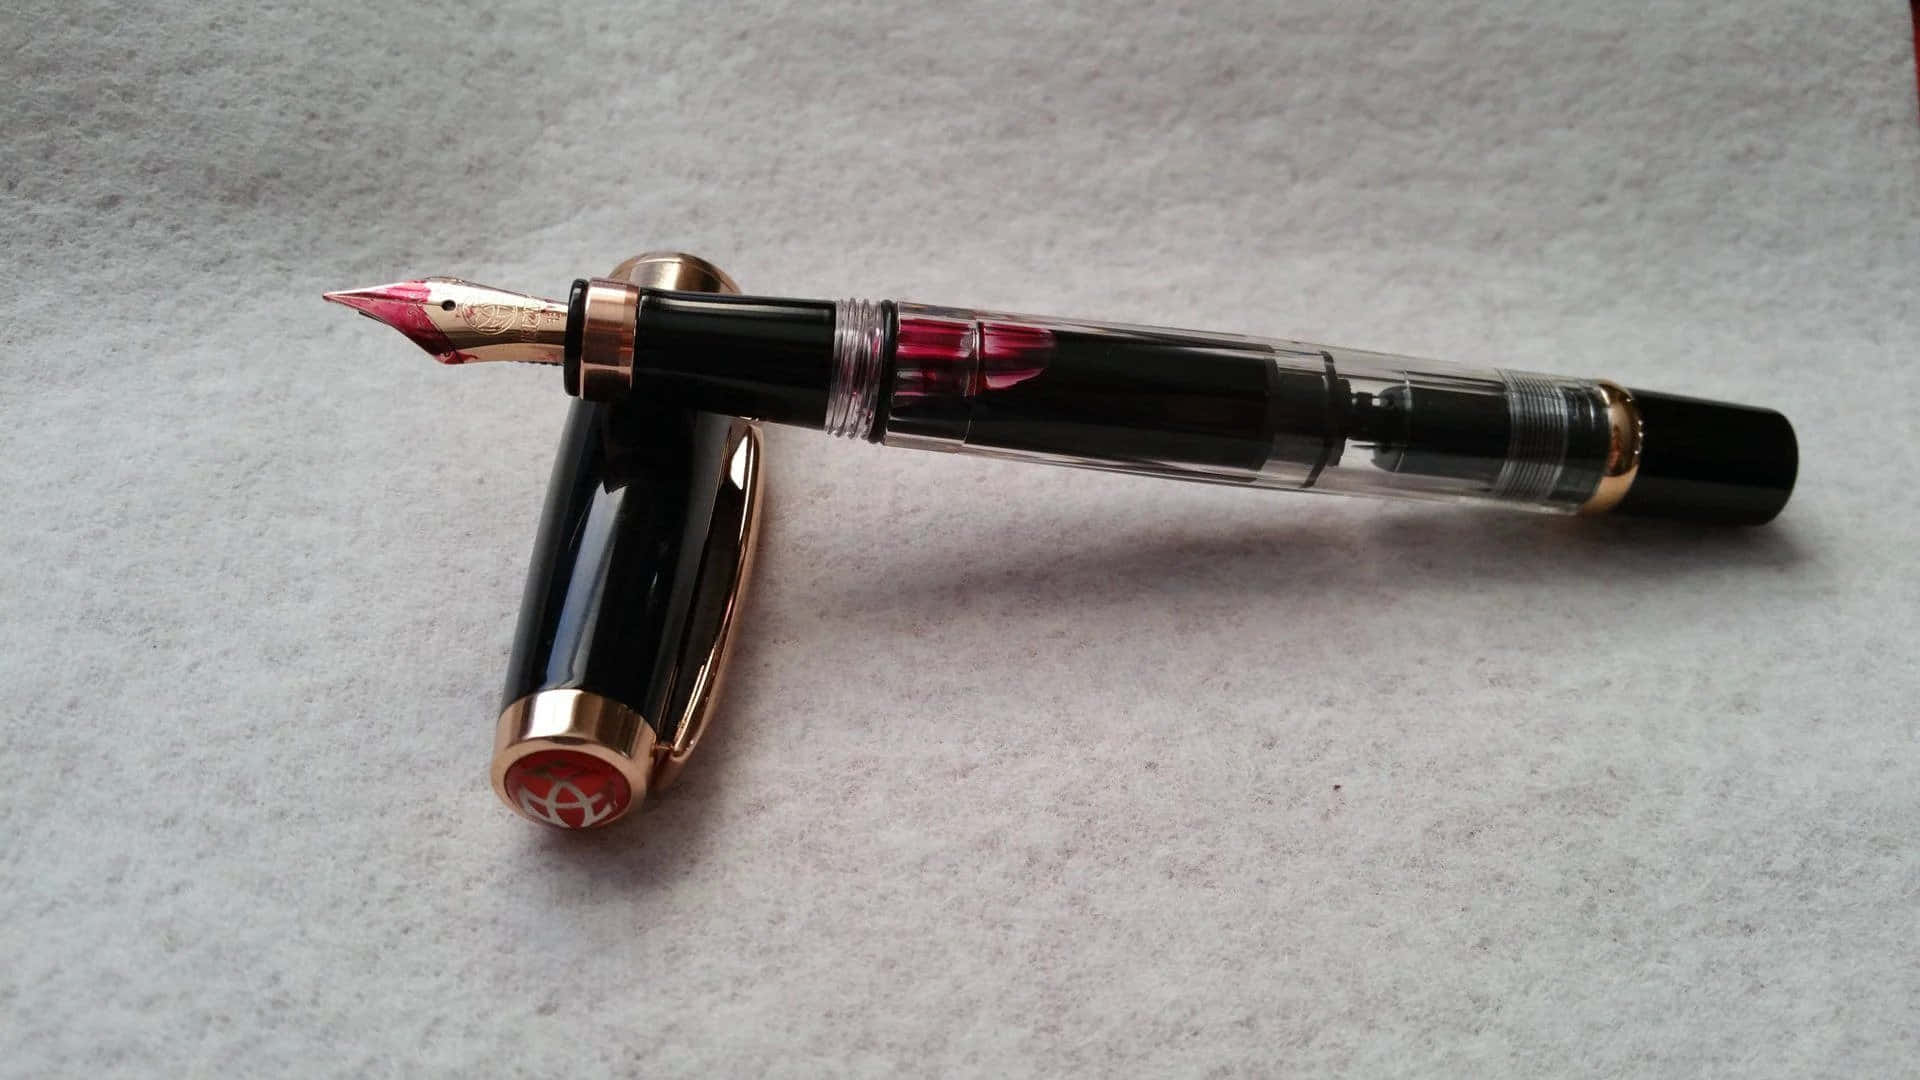 A Fountain Pen With A Red Cap And A Black Barrel